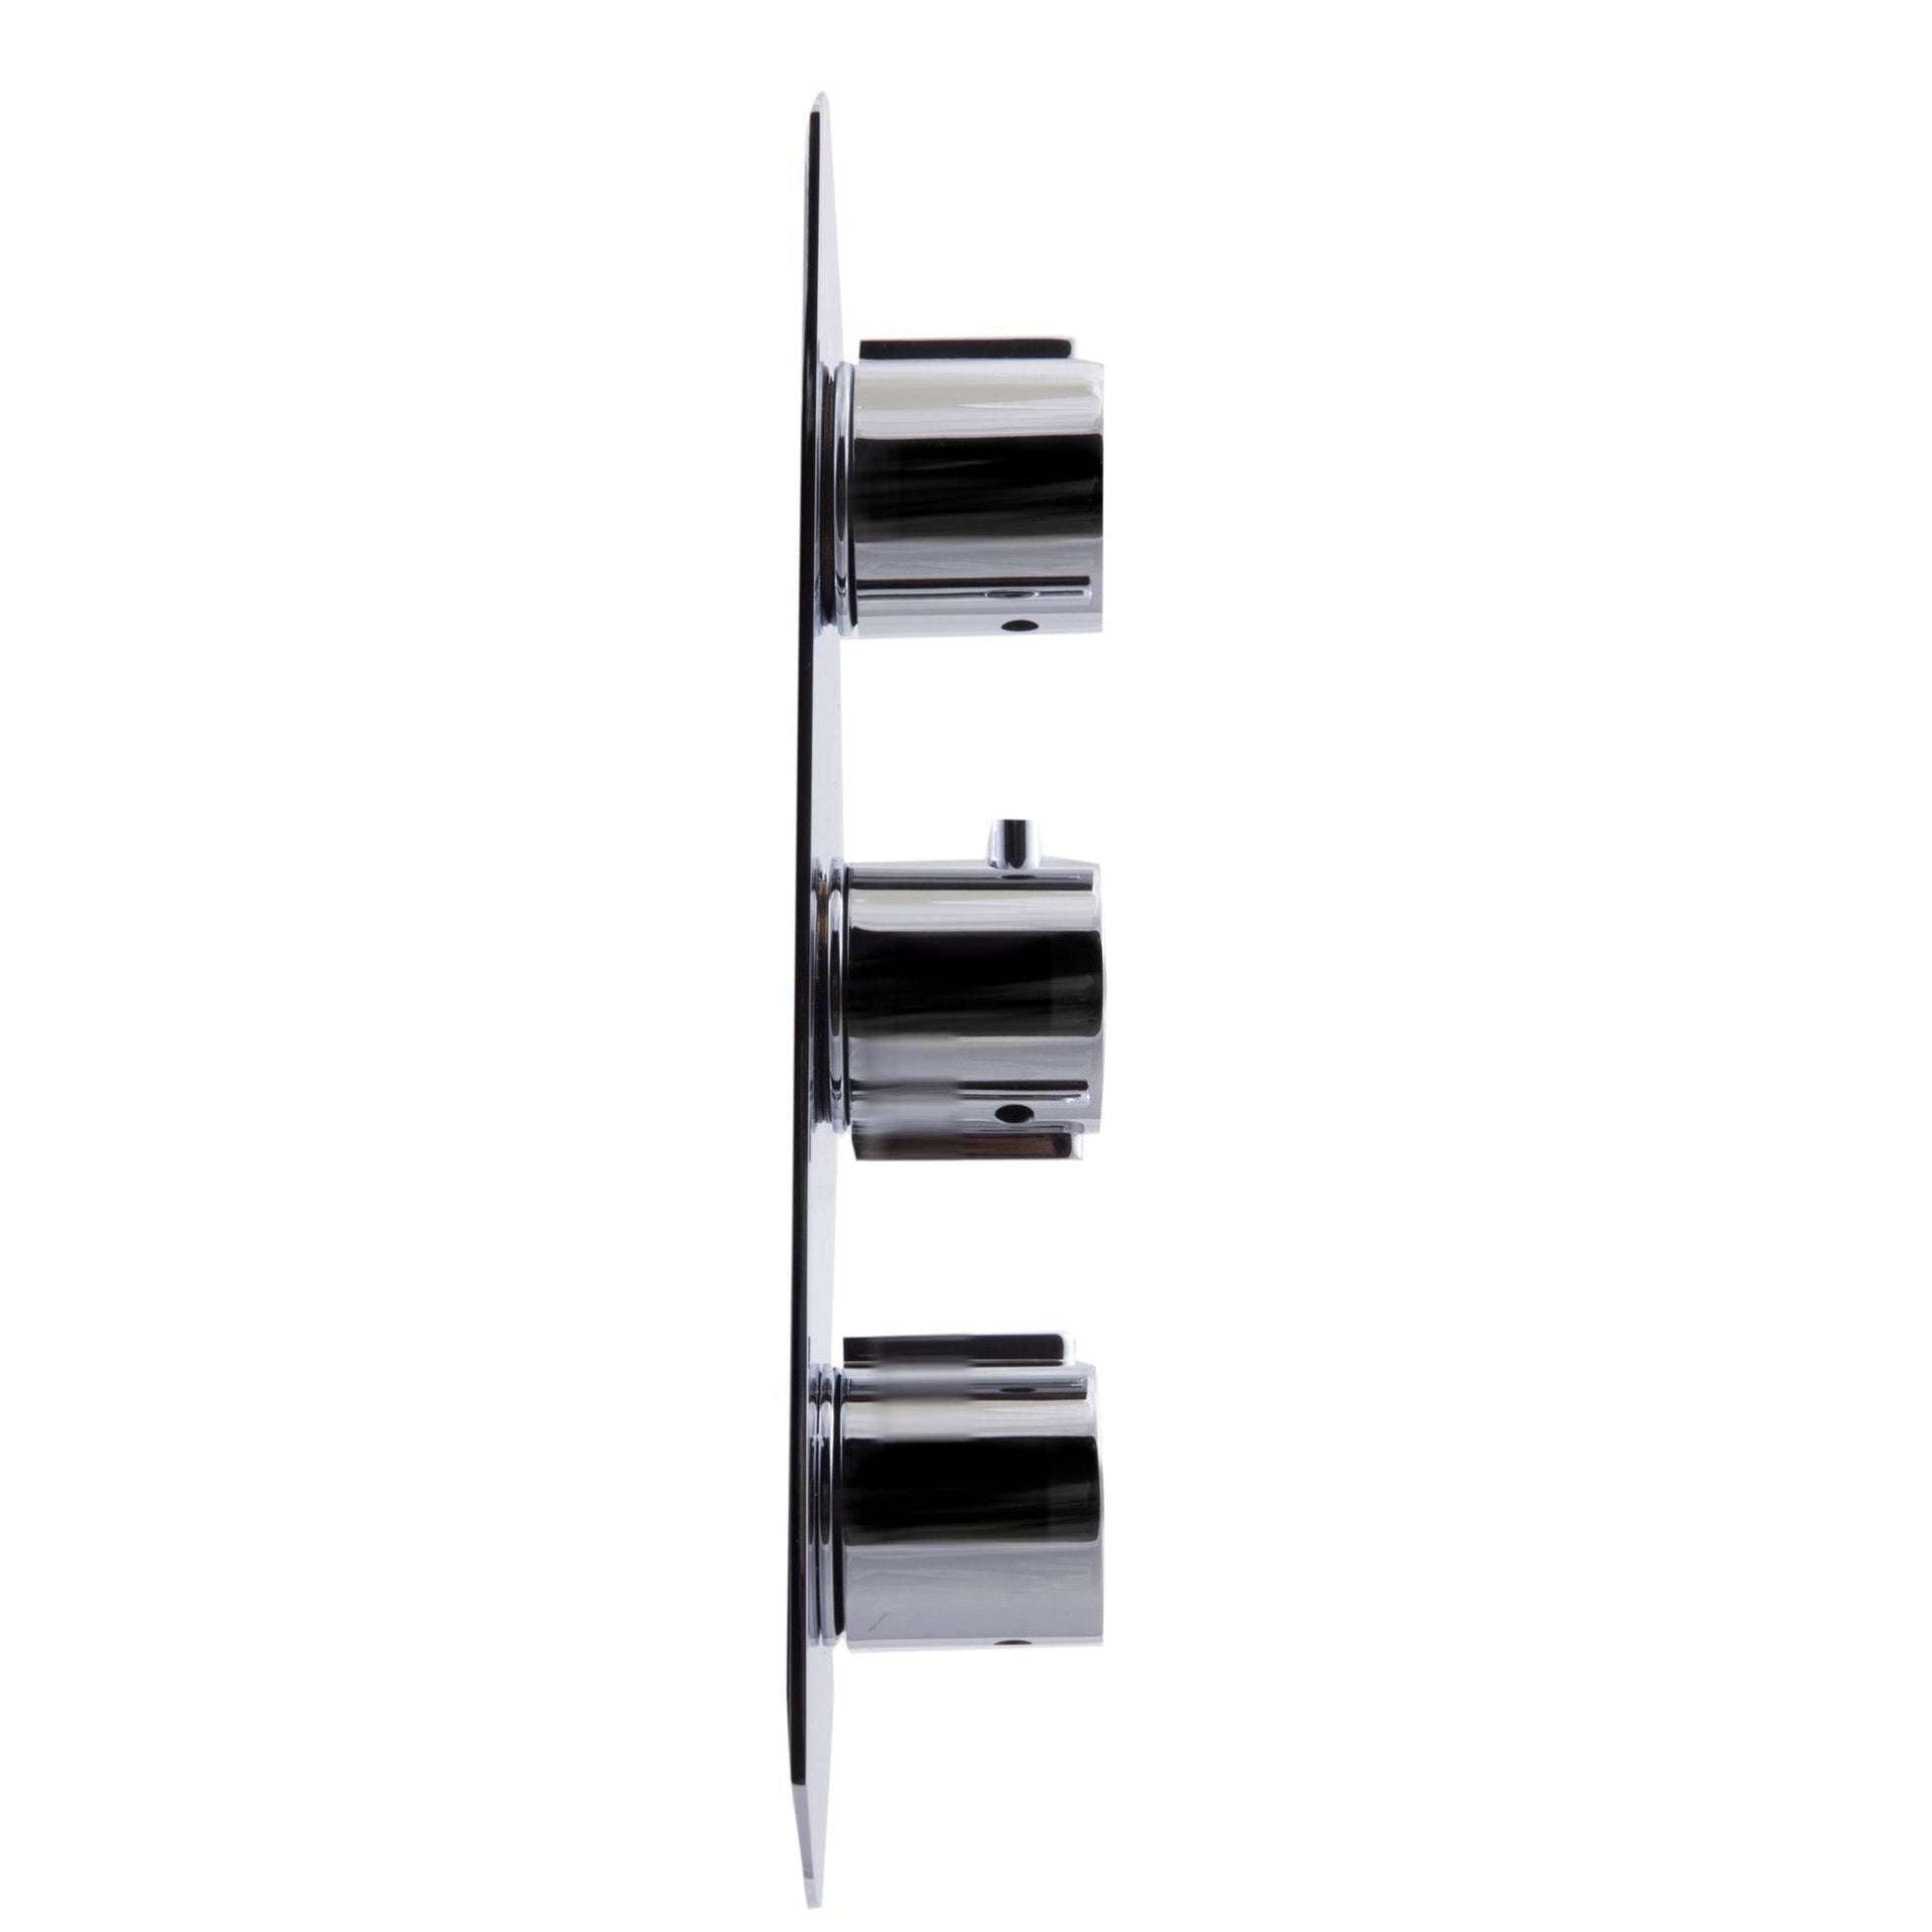 ALFI Brand AB3901-PC Polished Chrome 2 Way Thermostatic Shower Mixer With Round Knobs